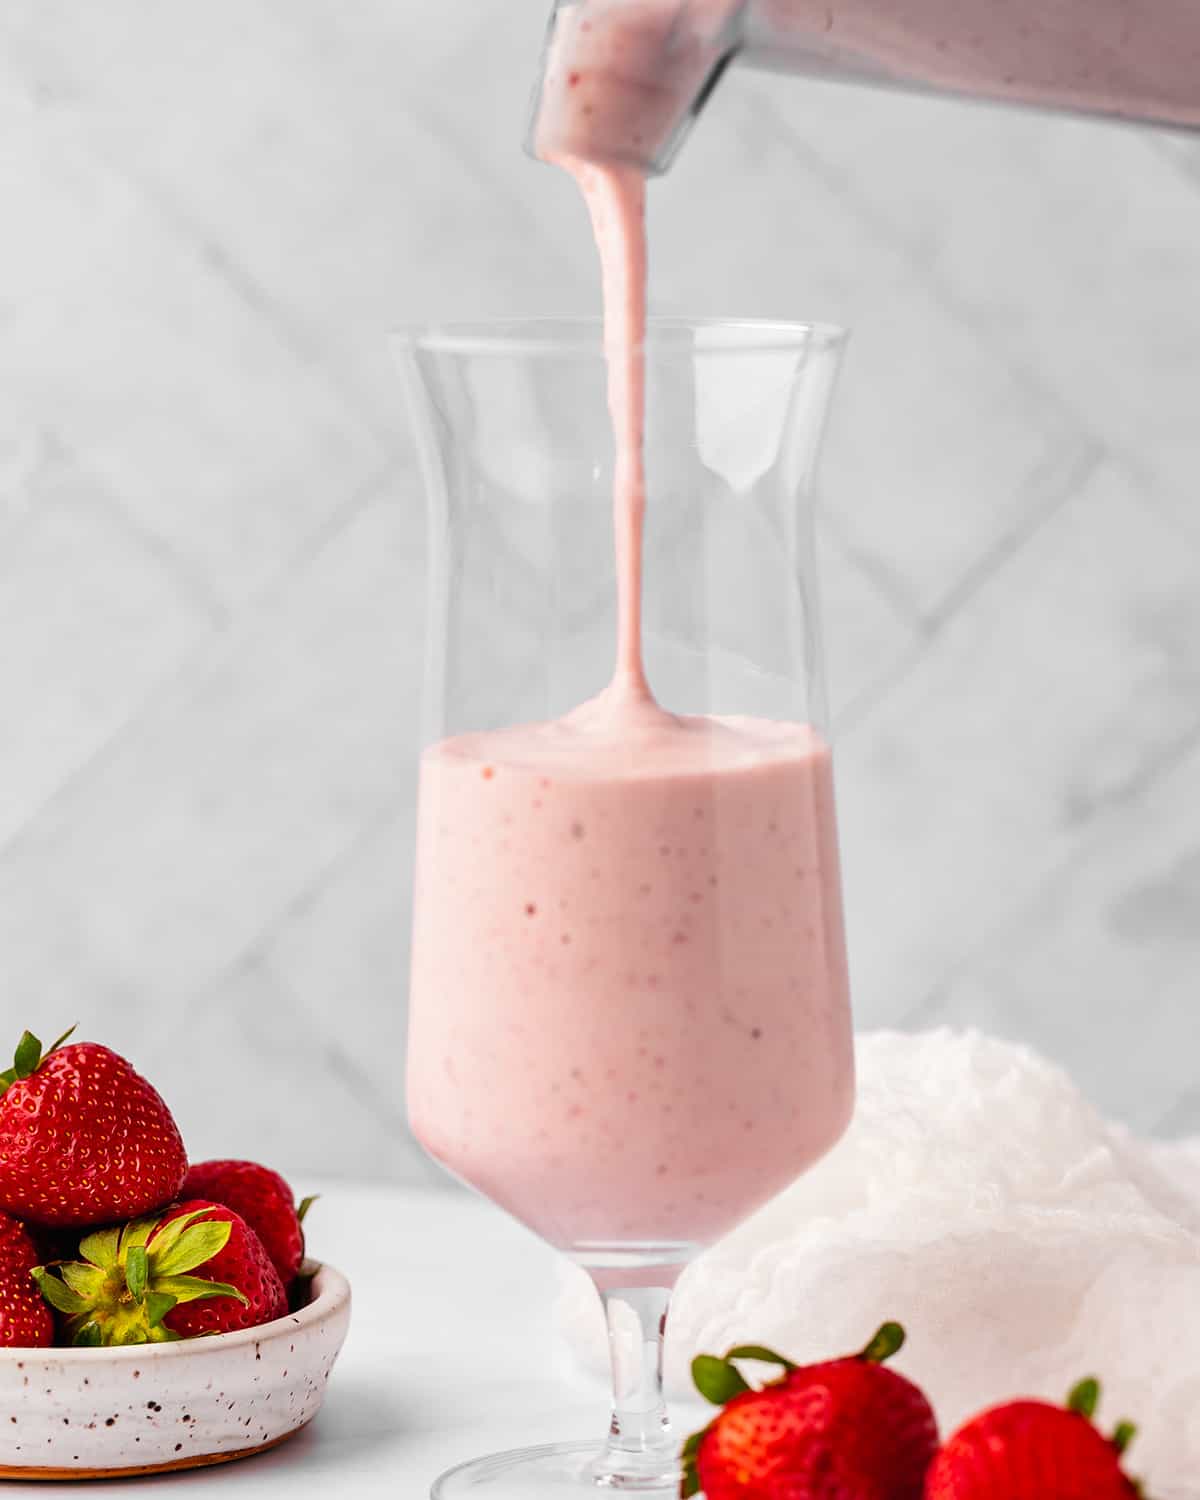 Strawberry Milkshake being poured into a glass